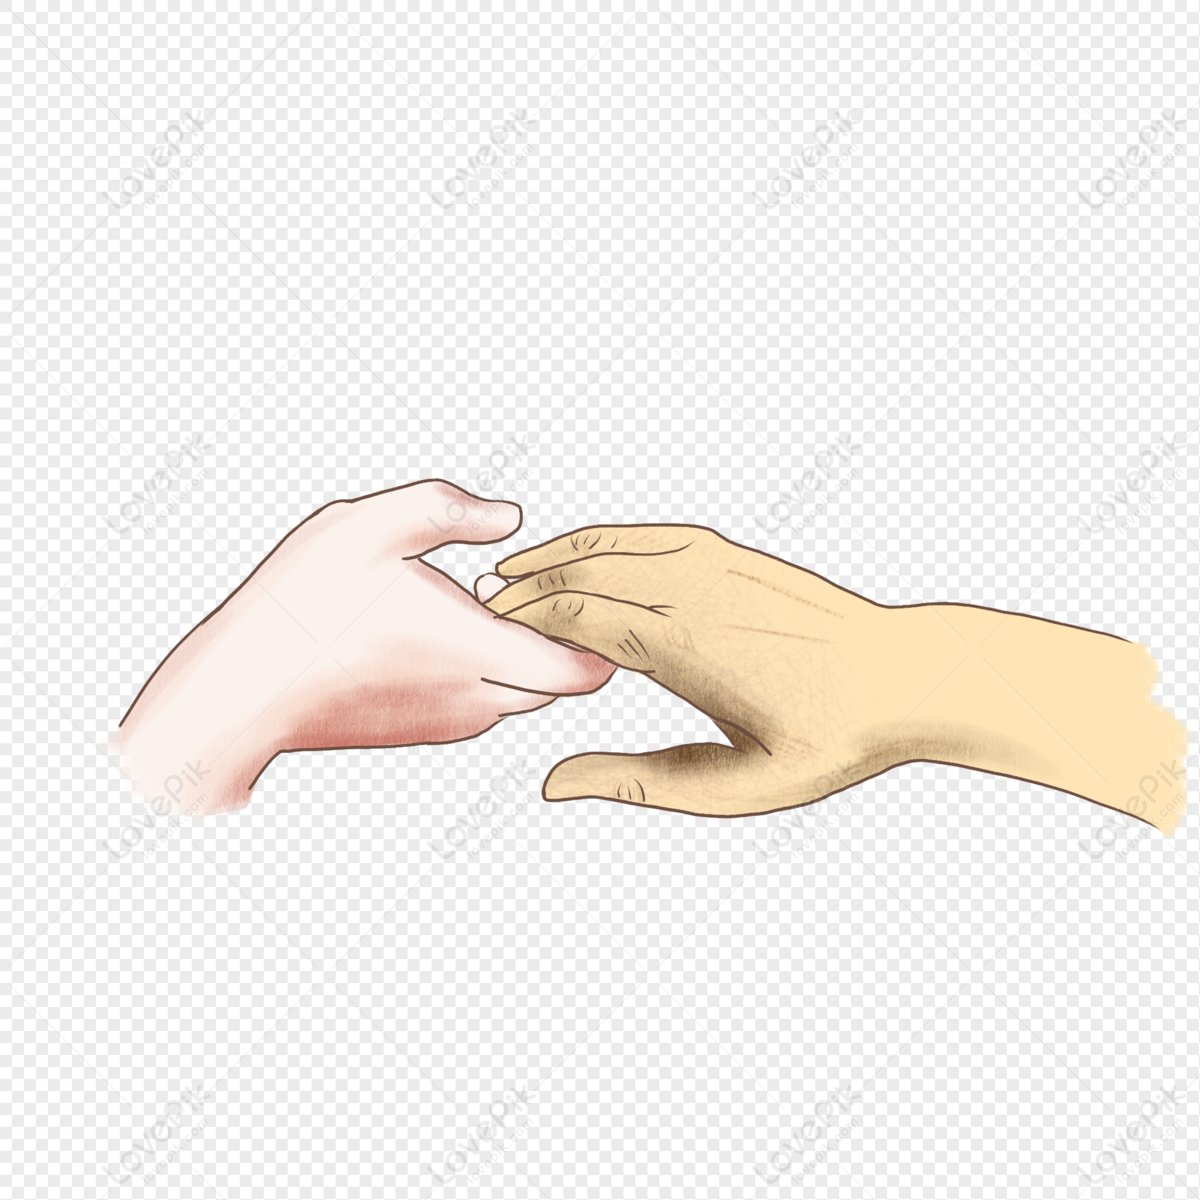 Mothers Hand PNG Image And Clipart Image For Free Download - Lovepik |  401124648